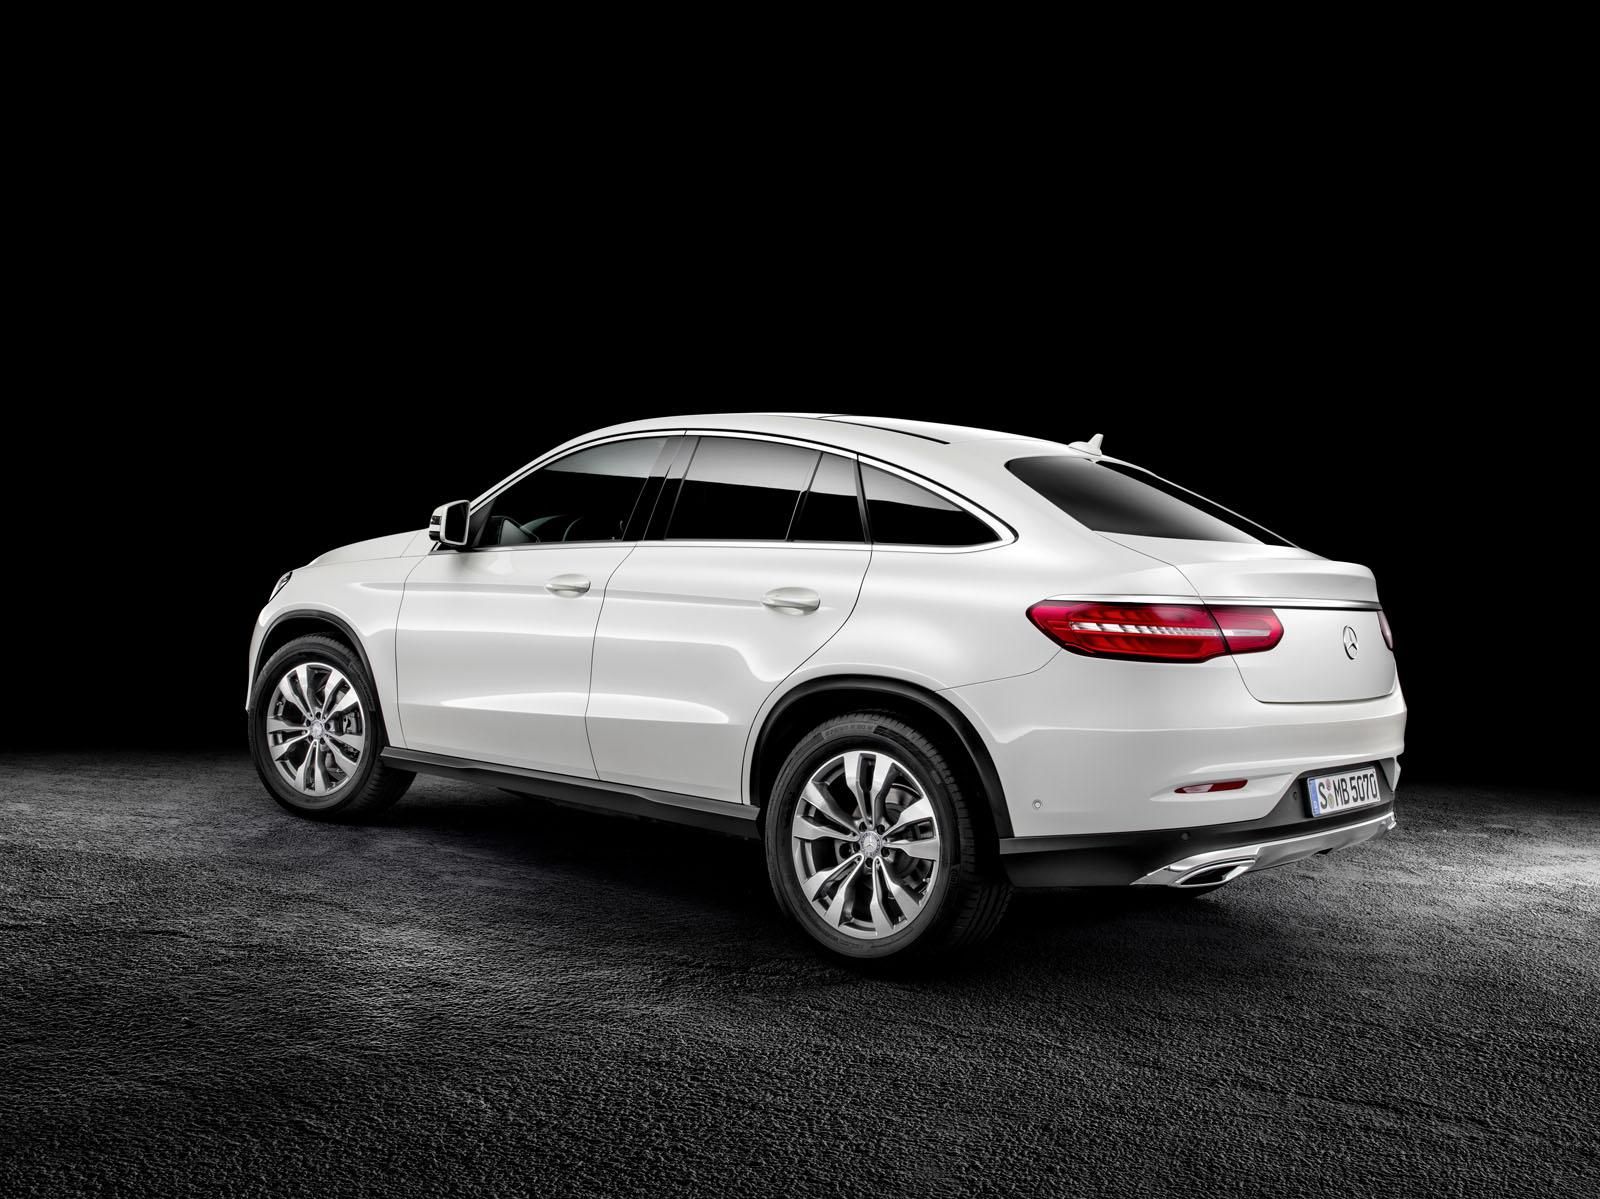 YEN MERCEDES GLE COUPE LK RESM GALERS